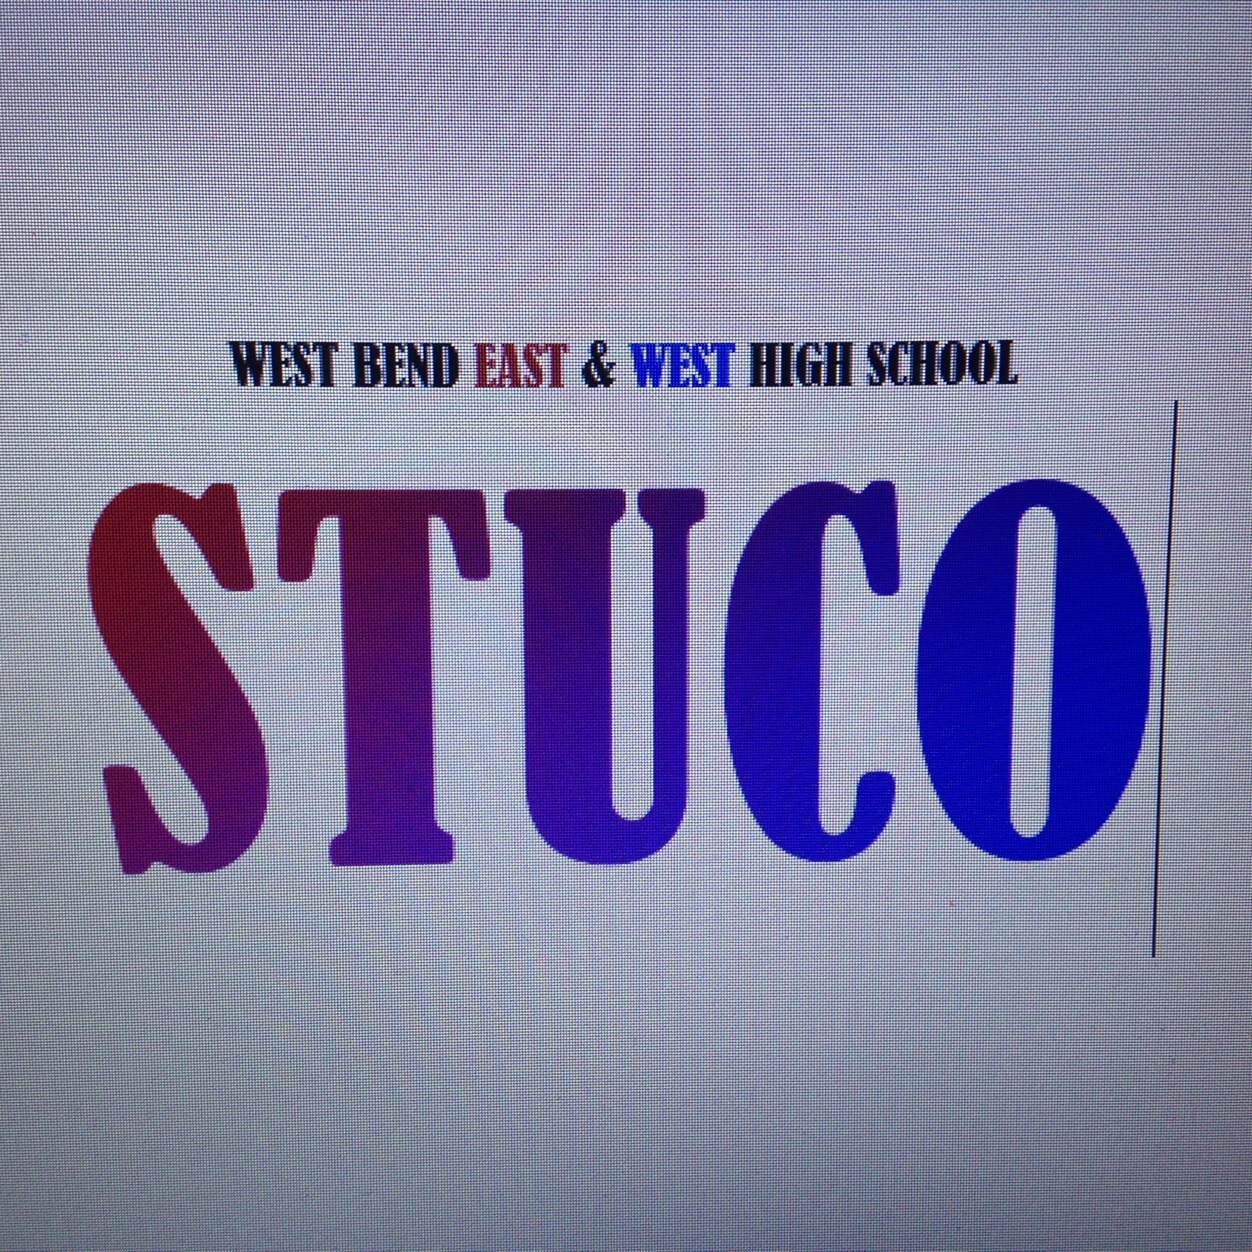 This is the page for West Bend East & West High School's STUCO page. Follow us for meetings about all of the schools events!